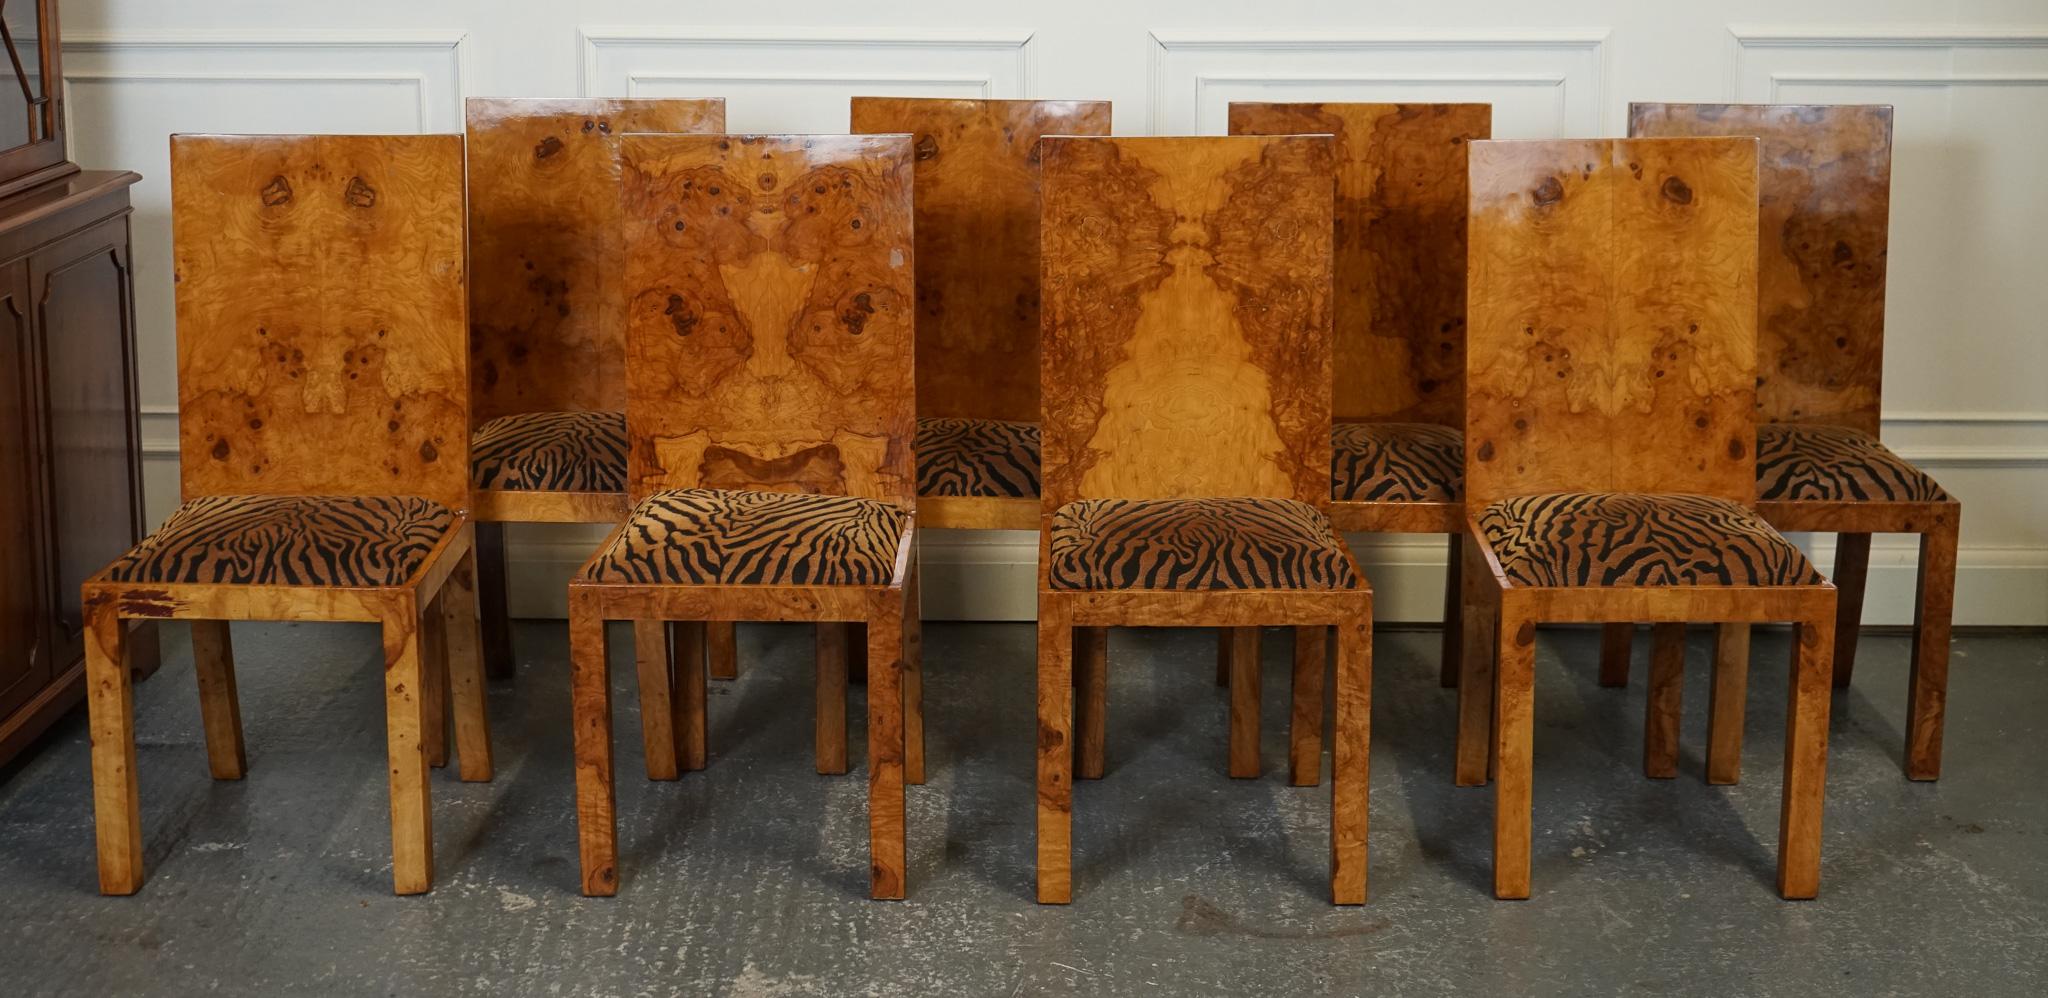 Antiques of London



We are delighted to offer for sale this Lovely Set Of 8 Dining Chairs.

The Burr Walnut veneer Art Deco style animal print seats set of 8 dining chairs is a luxurious and visually striking collection that combines classic art